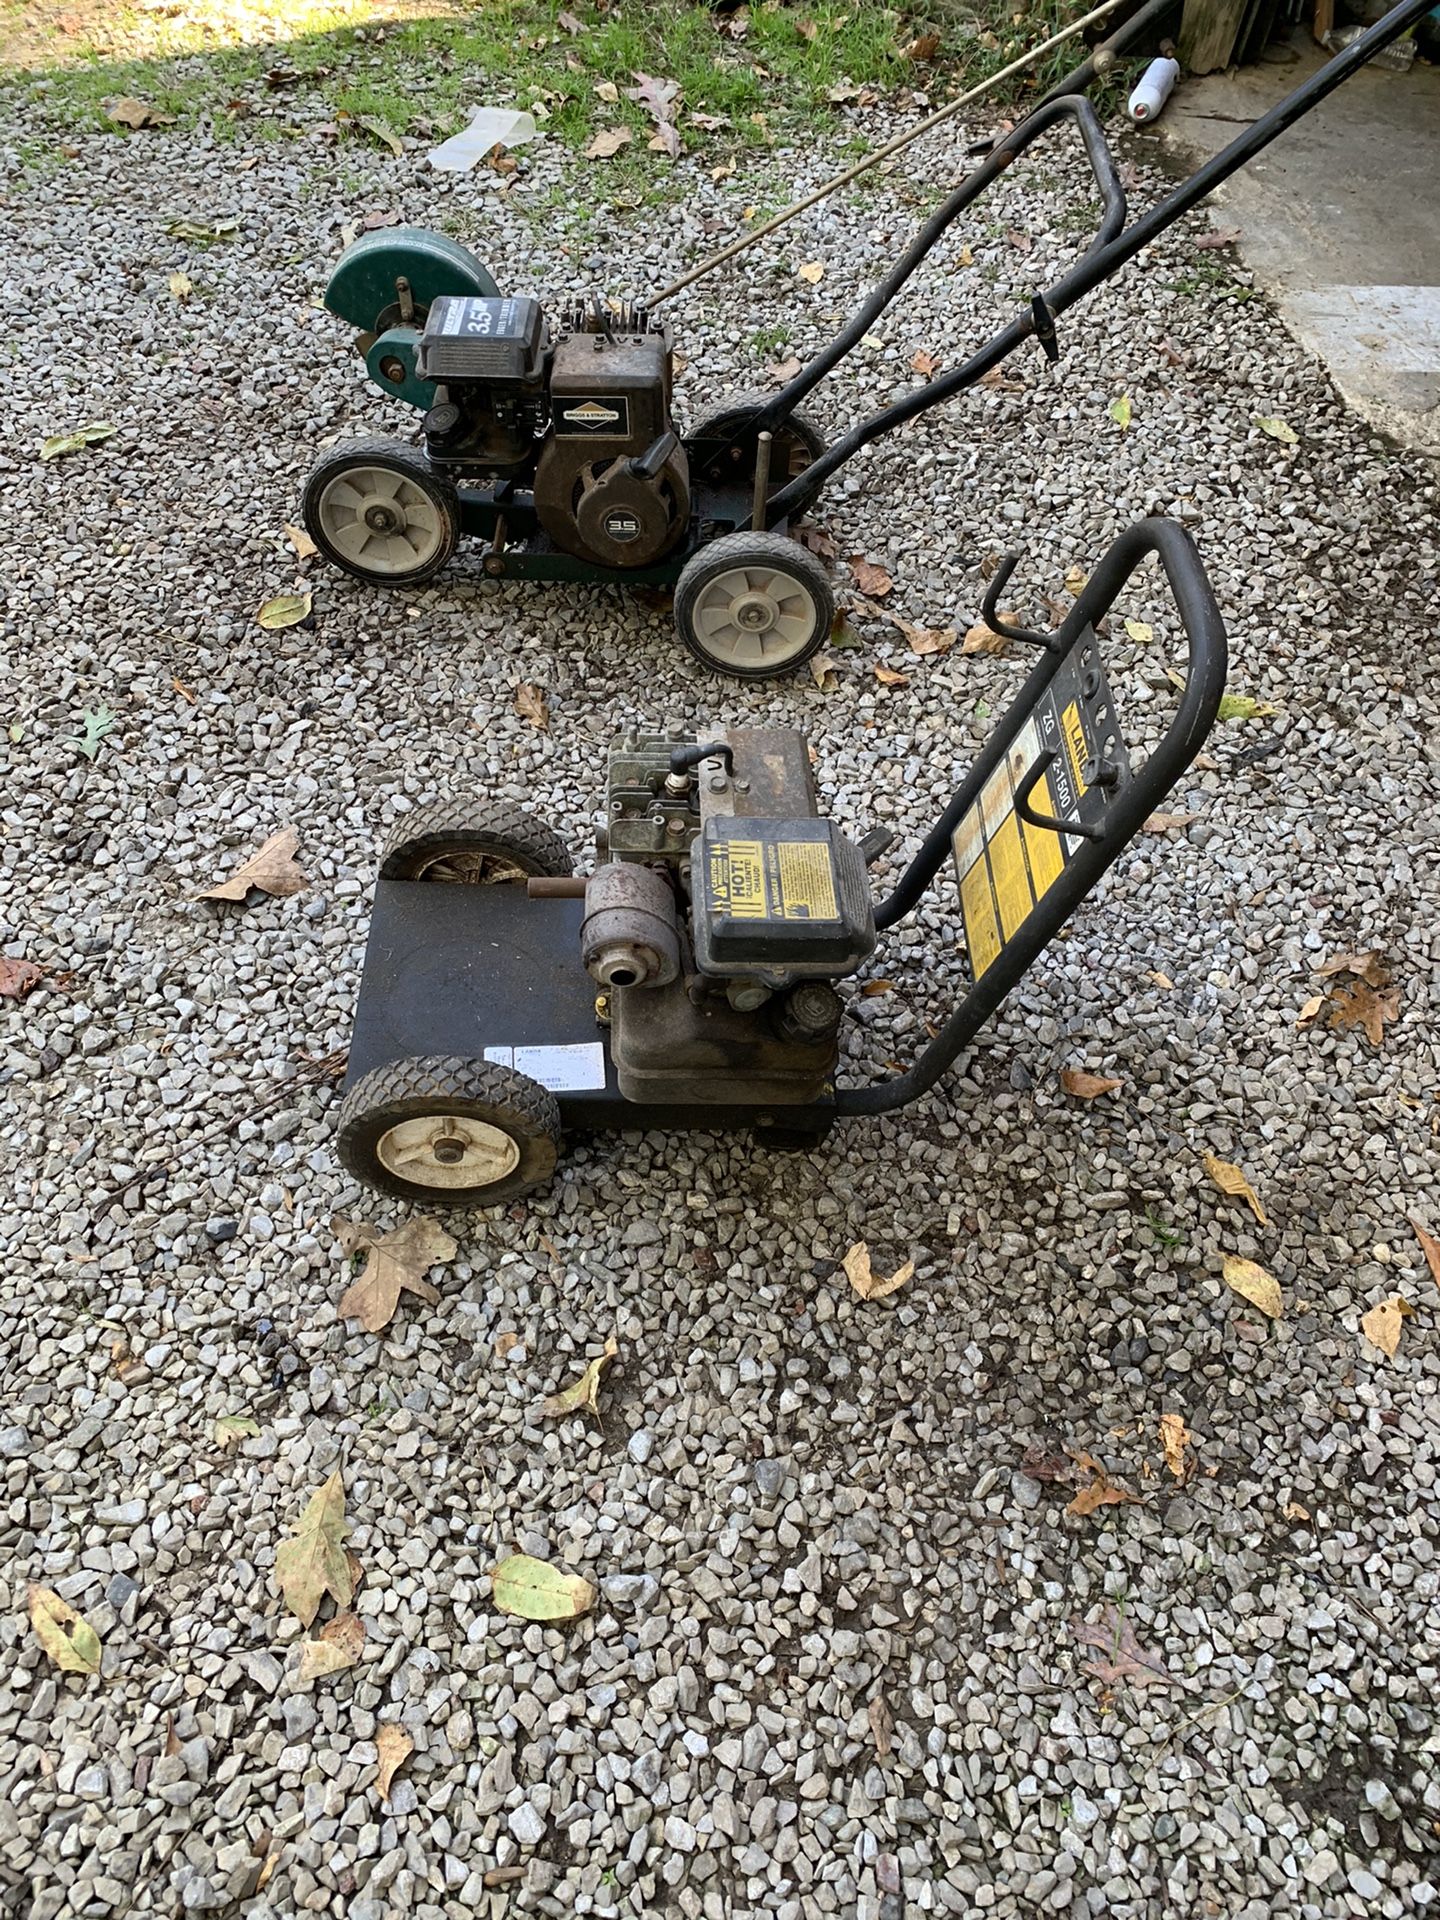 One 3.5 hp edger and a 3.5 Briggs